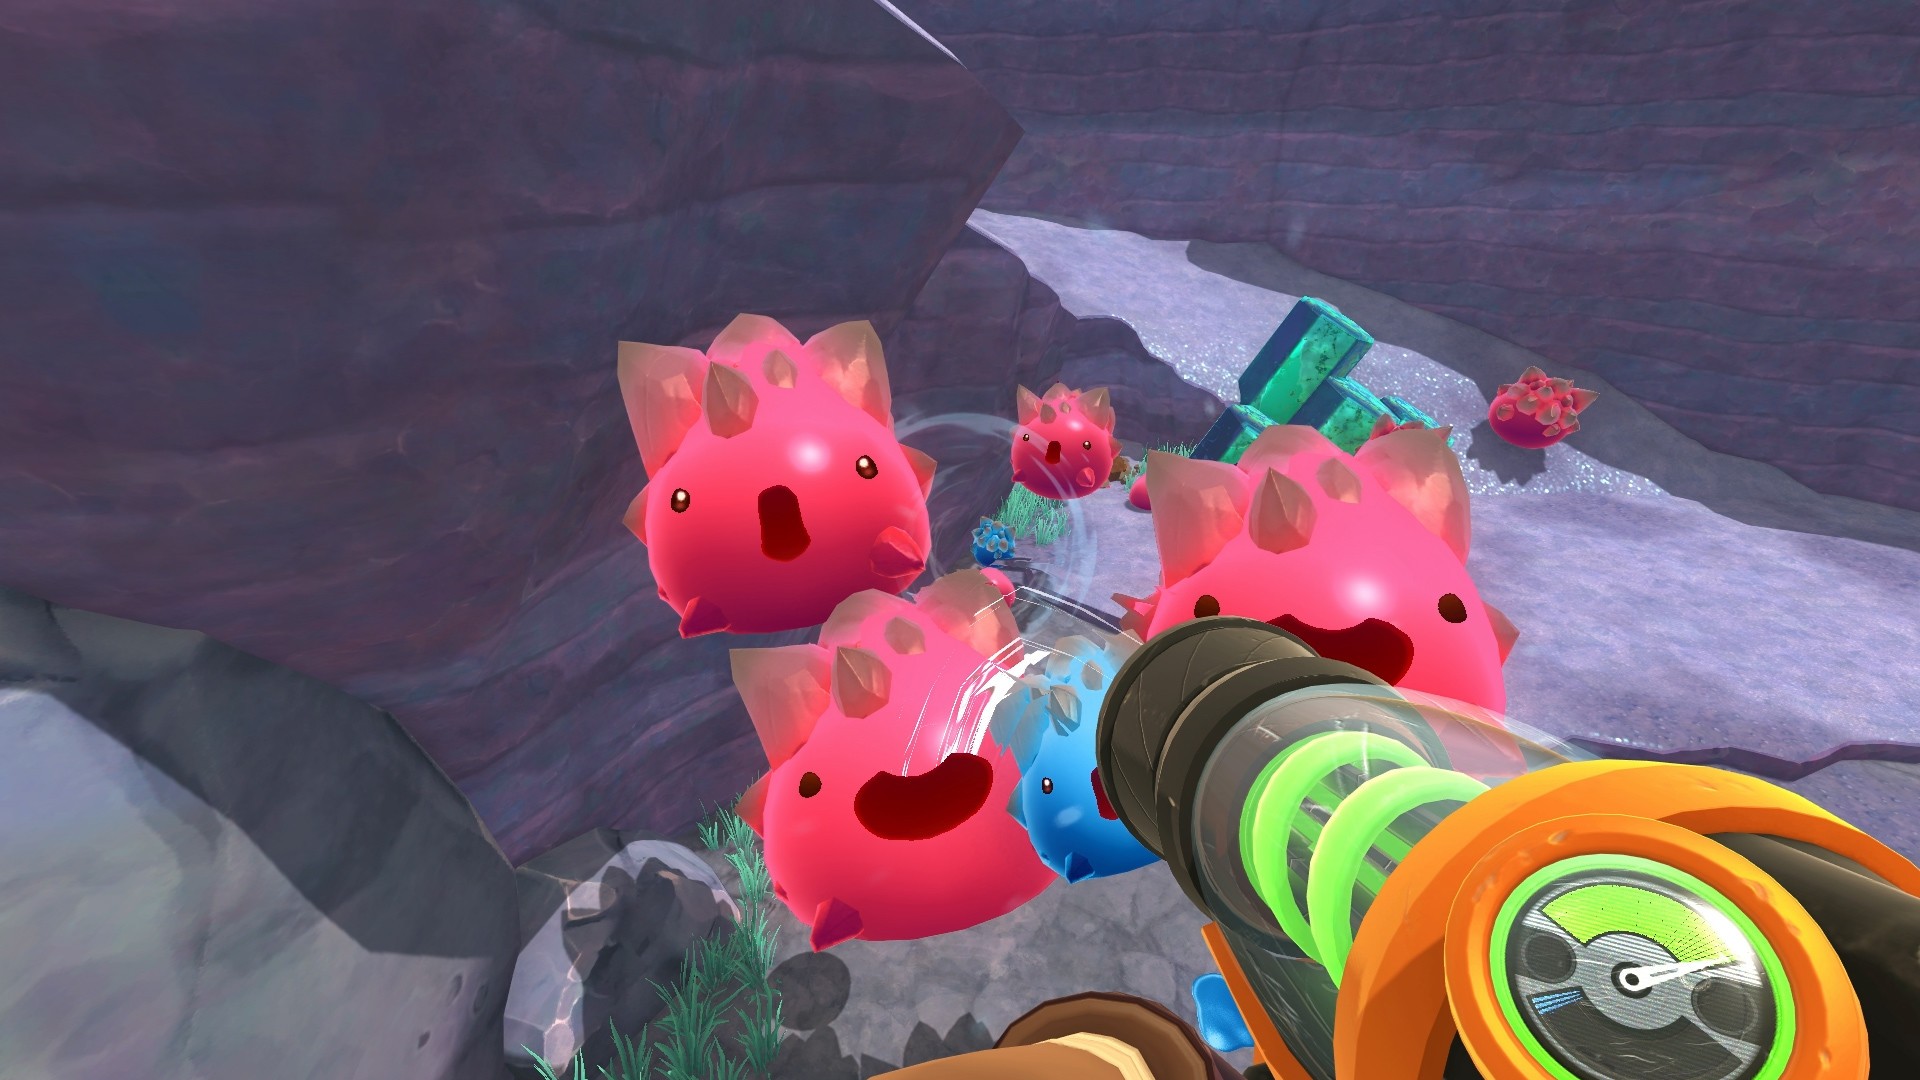 How to play Slime Rancher (Steam version) multiplayer